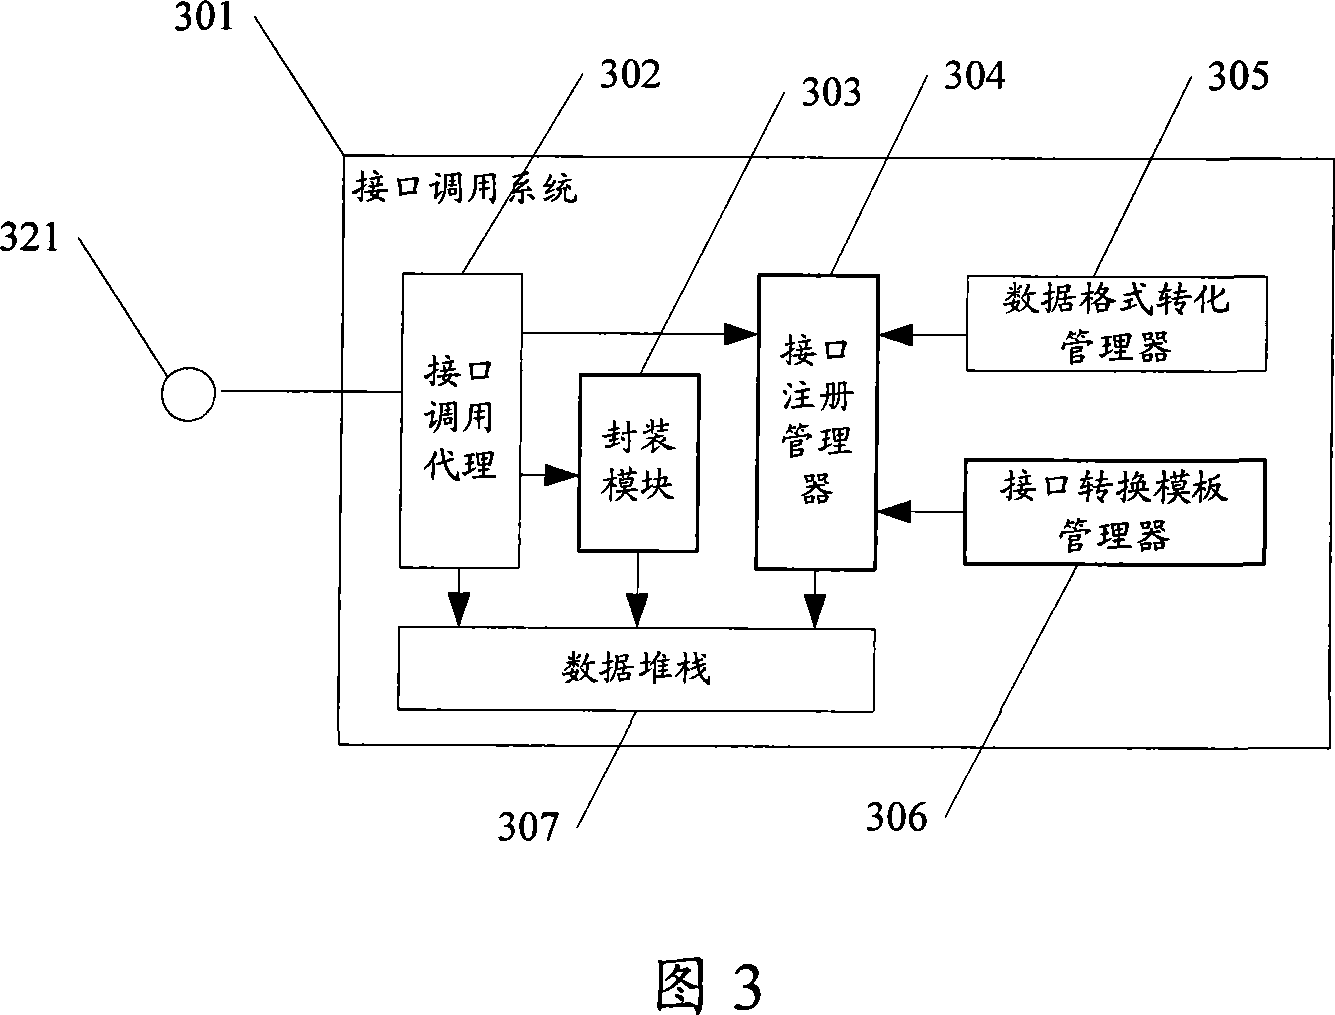 Dynamic mapping interface calling system and method